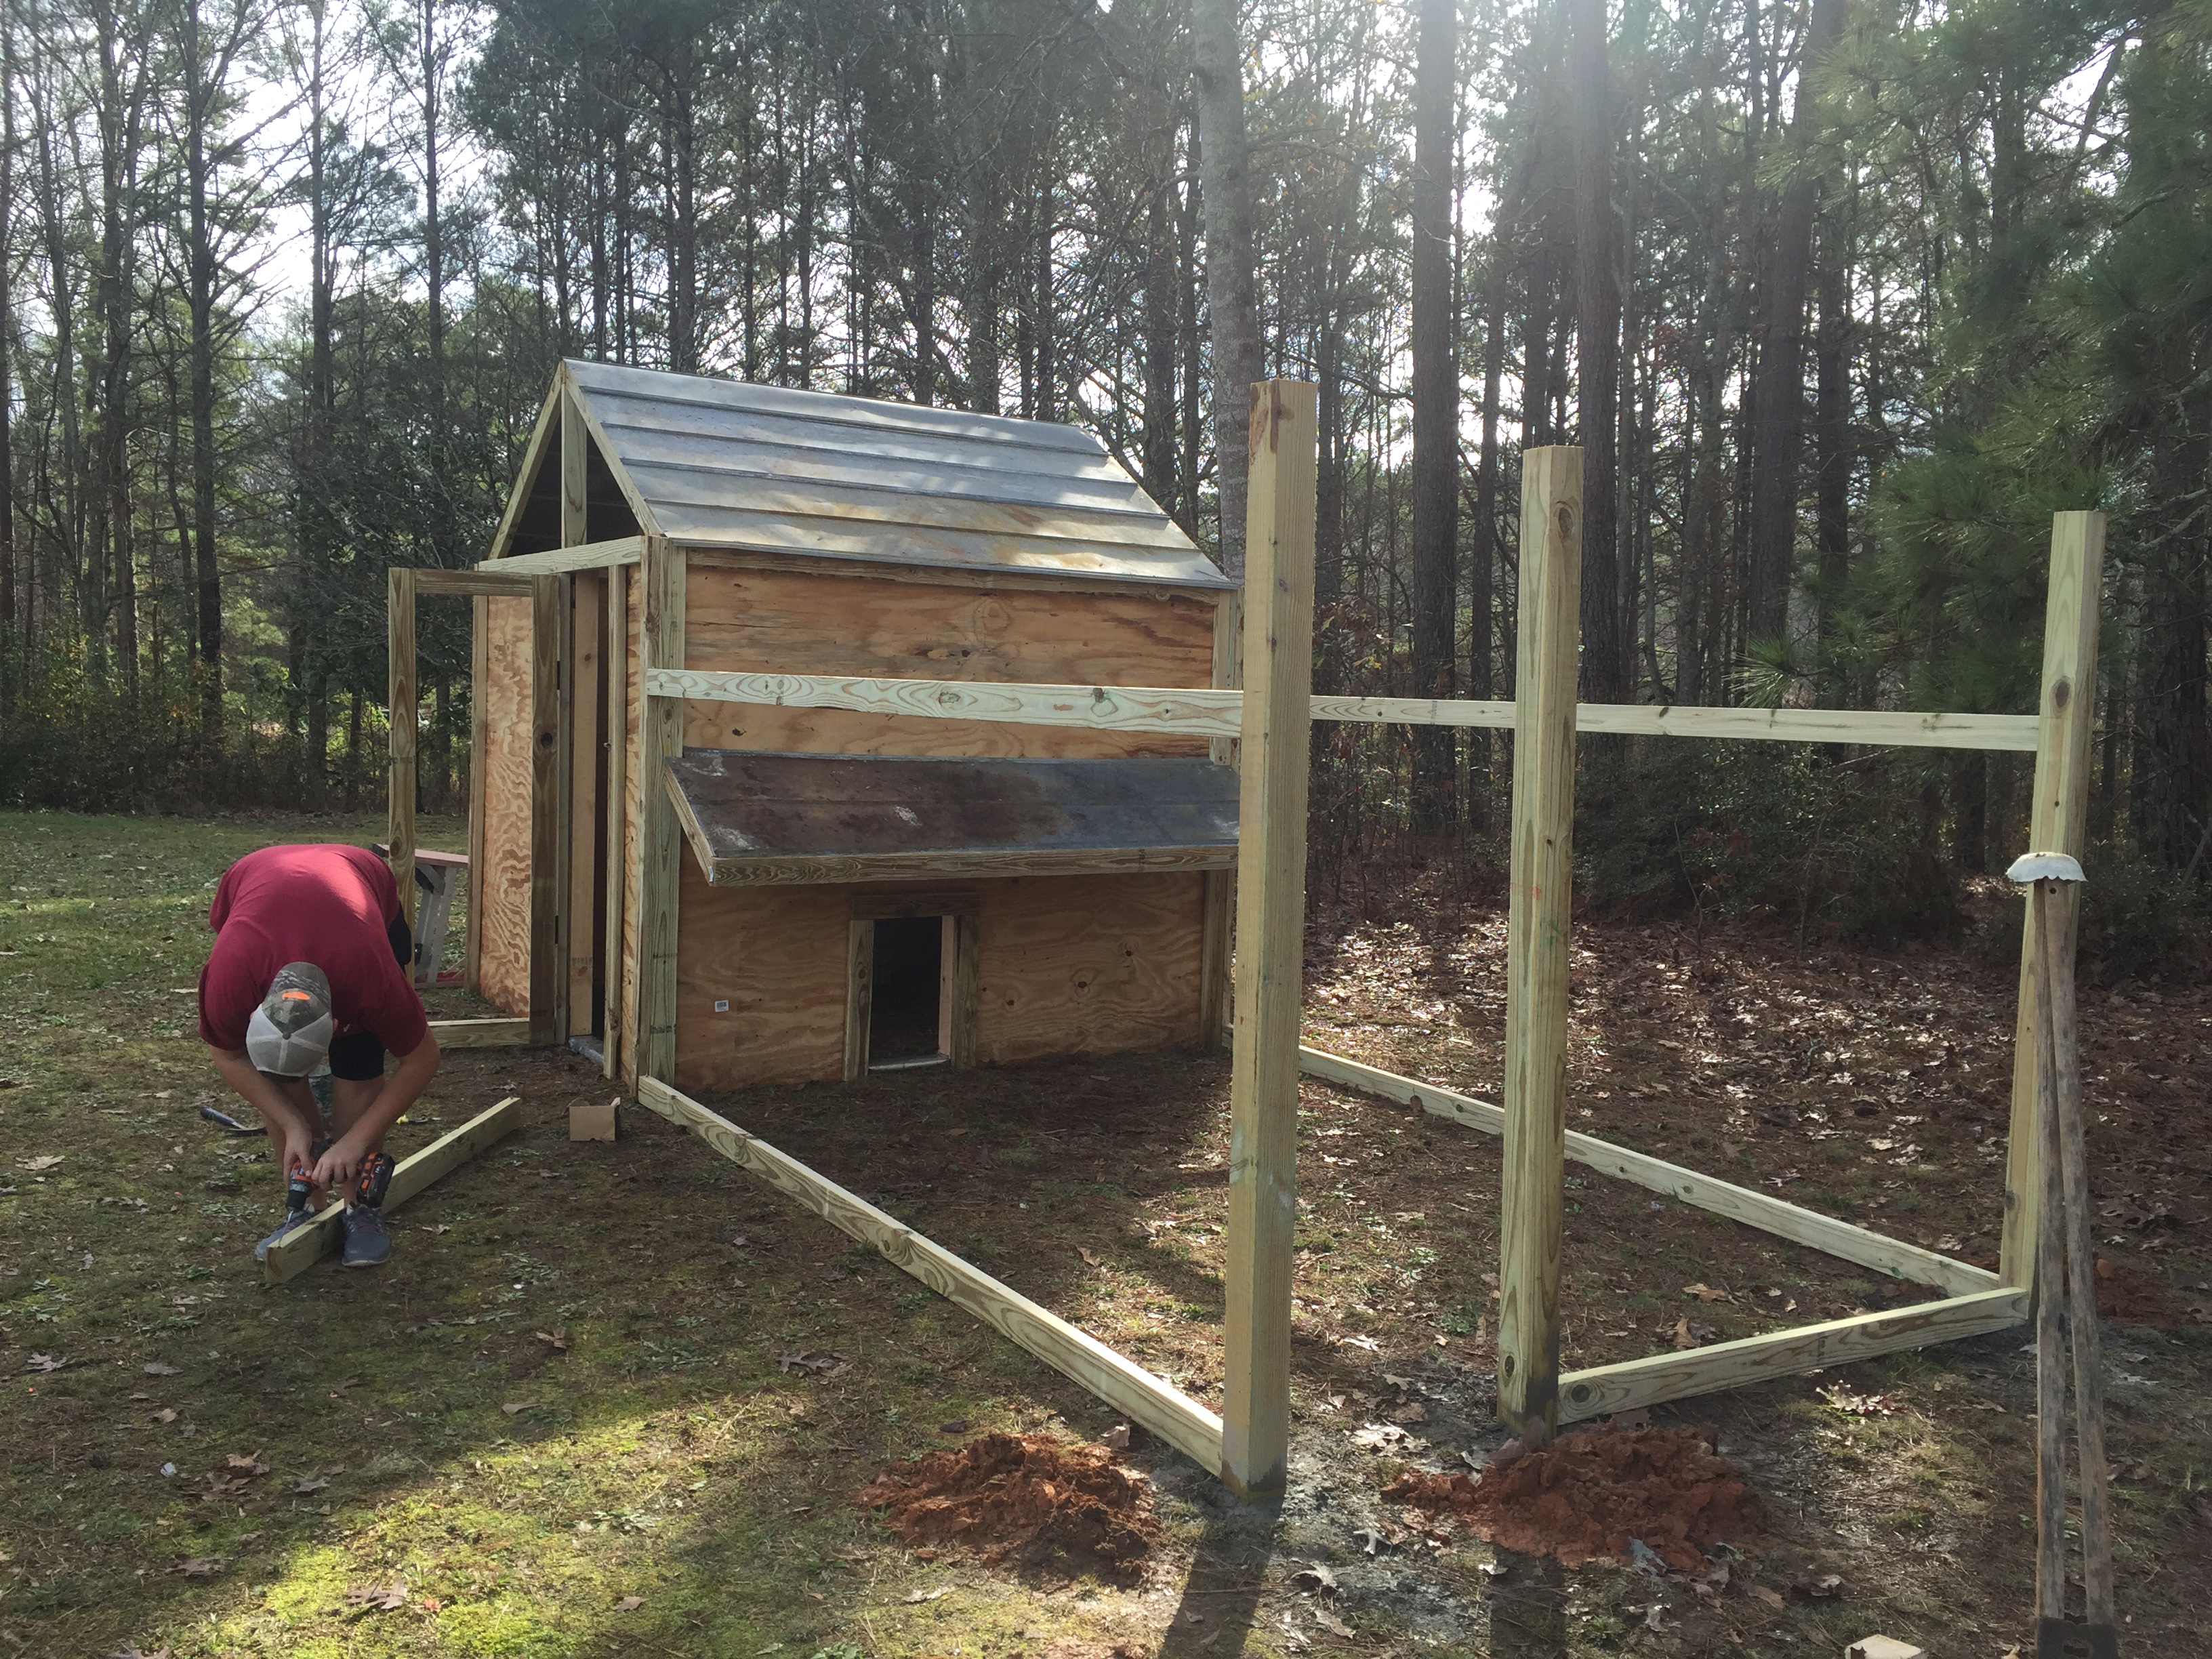 Building another coop for a buddy.